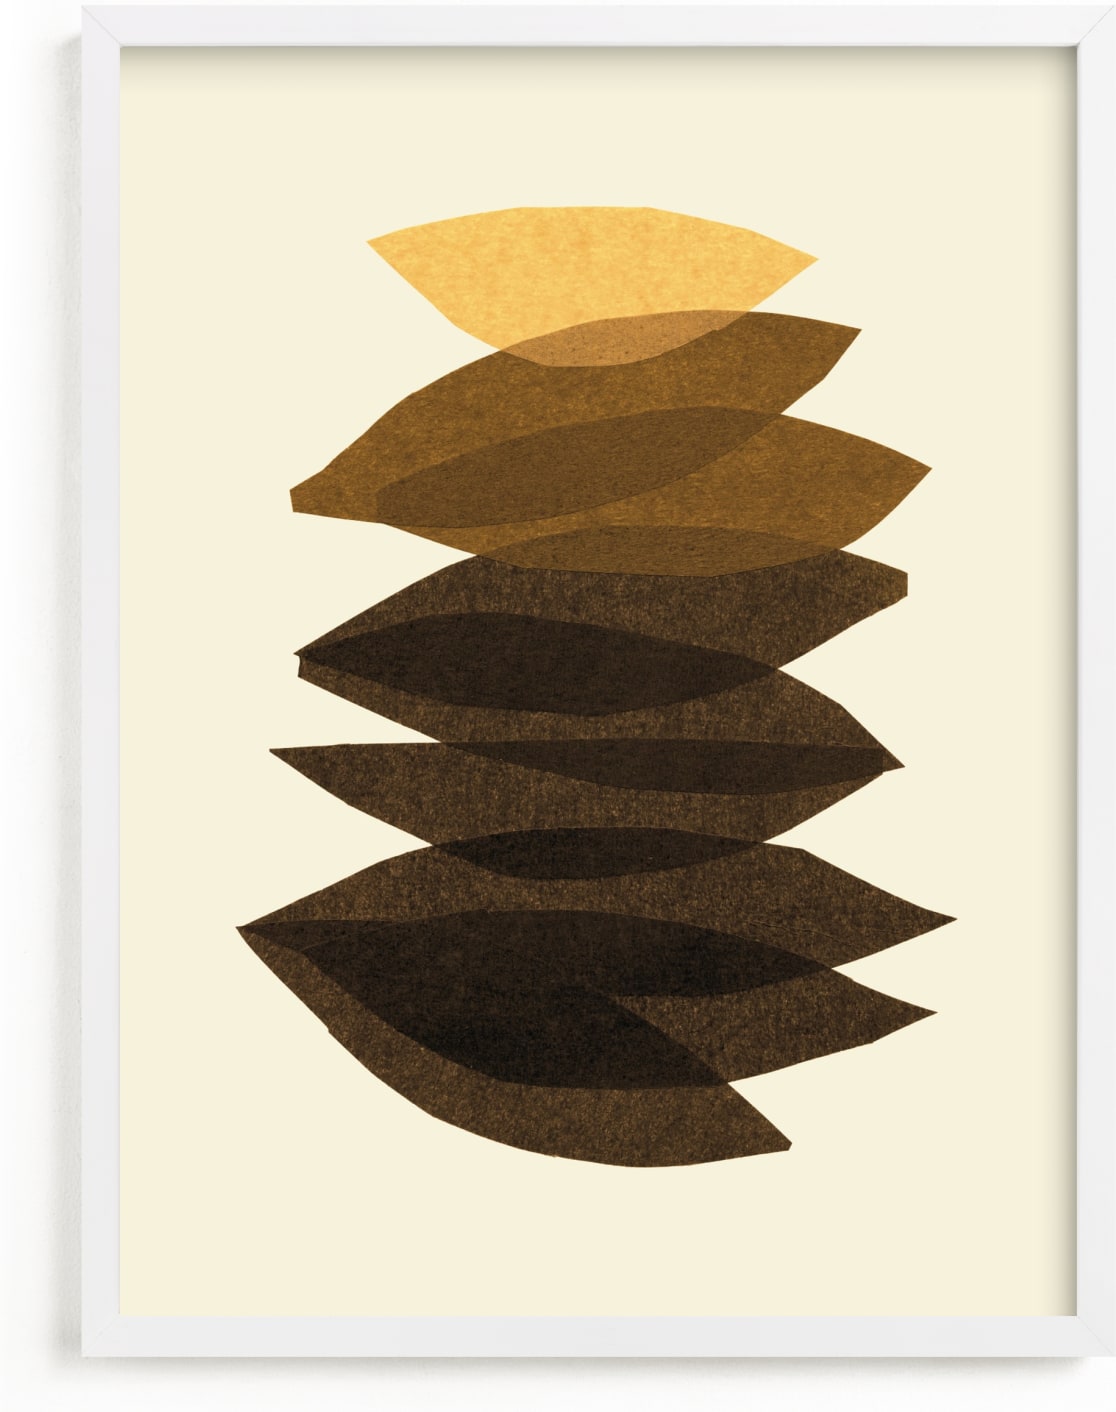 This is a brown art by Carrie Moradi called organic stack.